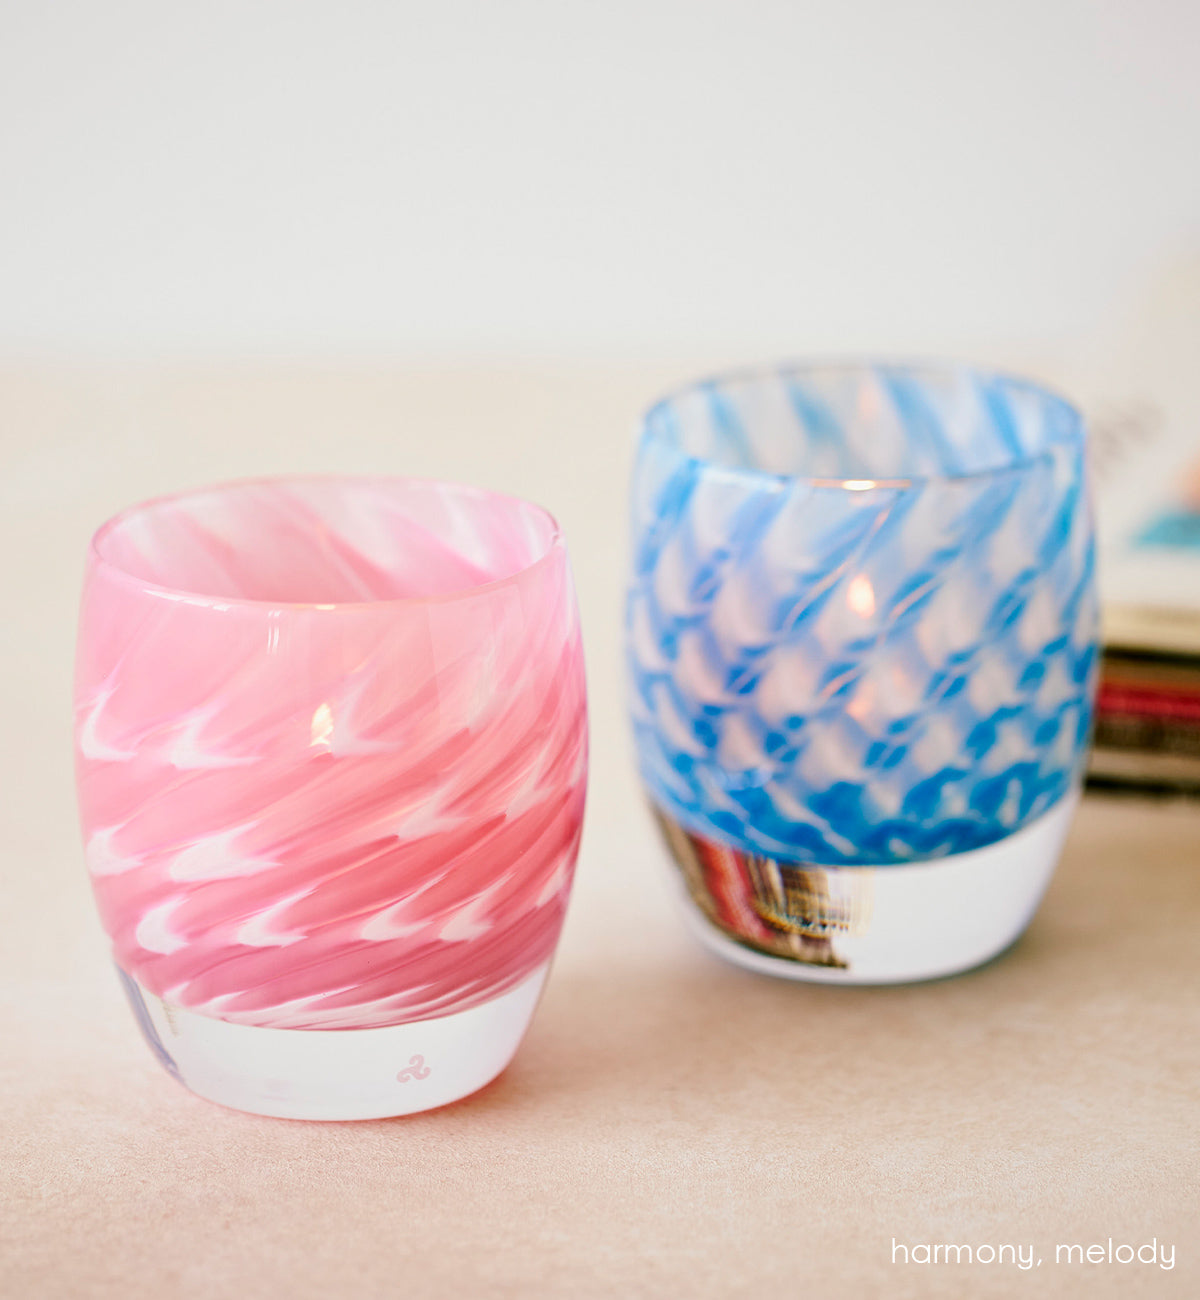 harmony and melody, sweeping pink and white and sweeping blue and white hand-blow glass votive candle holders on a table with stack of magazines behind.